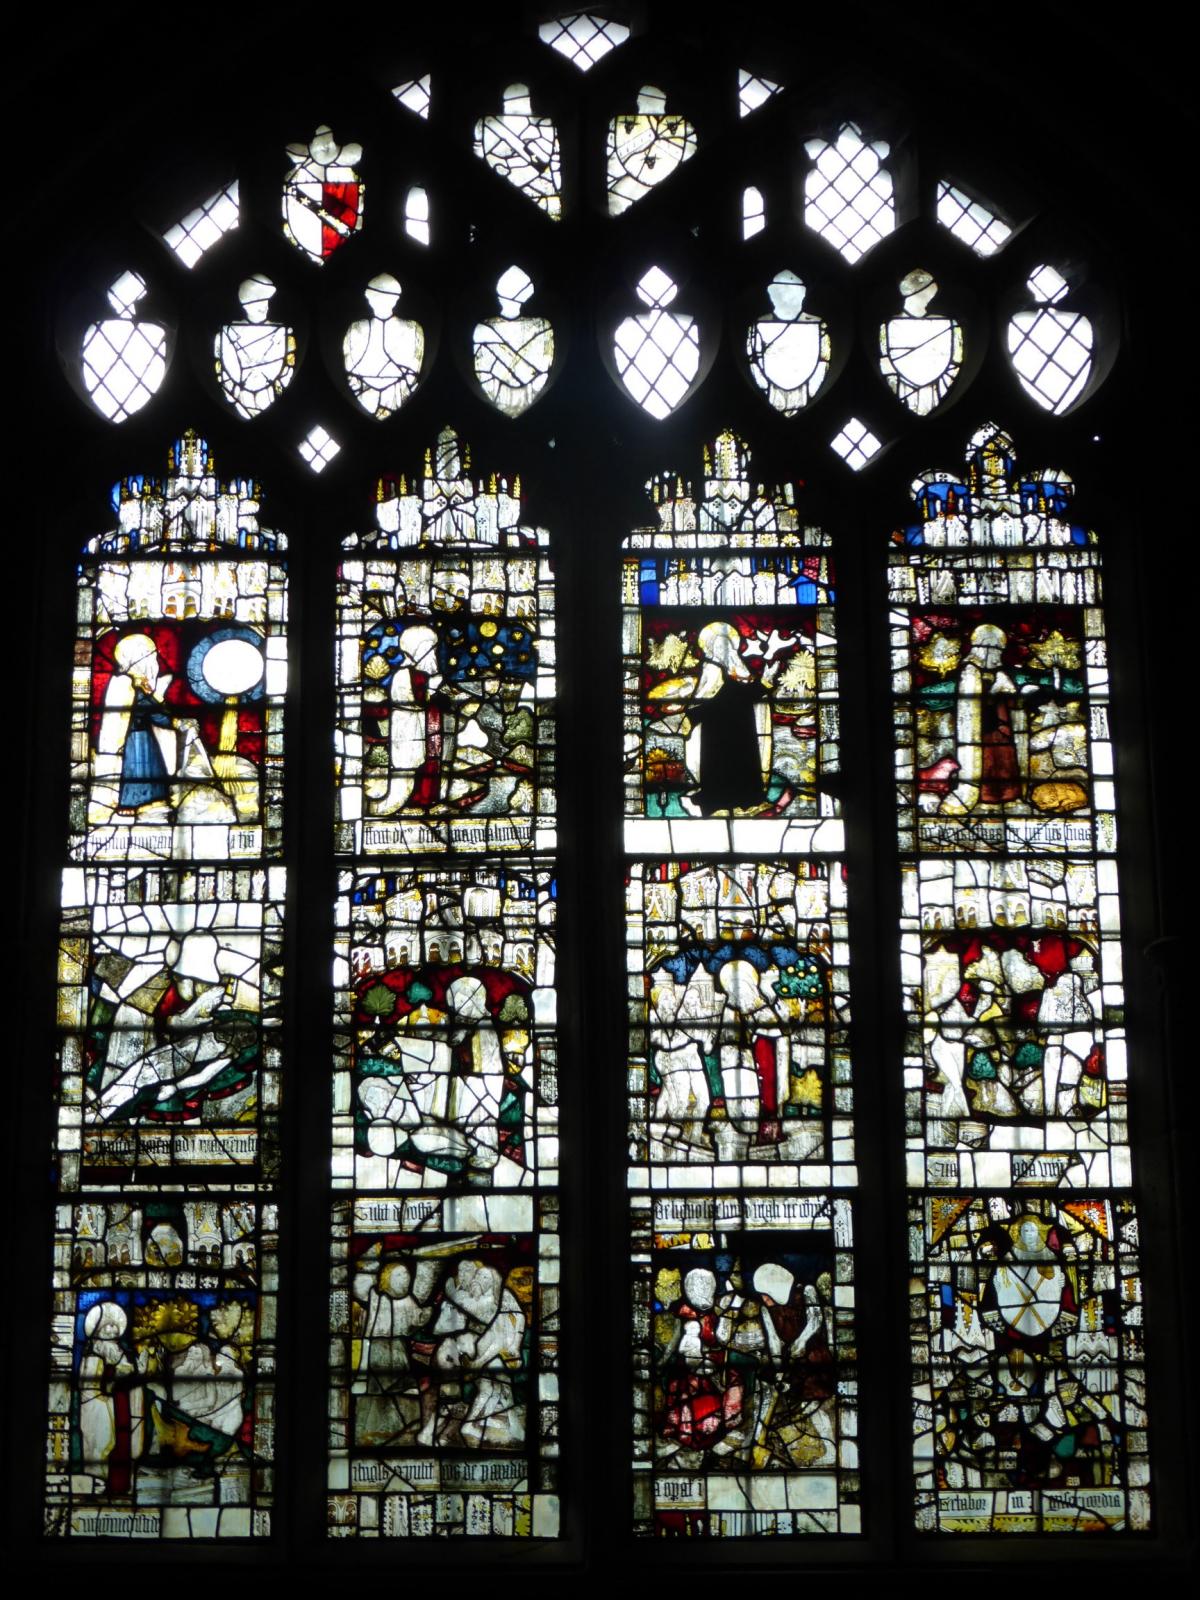 The ancient windows of Gt. Malvern Priory